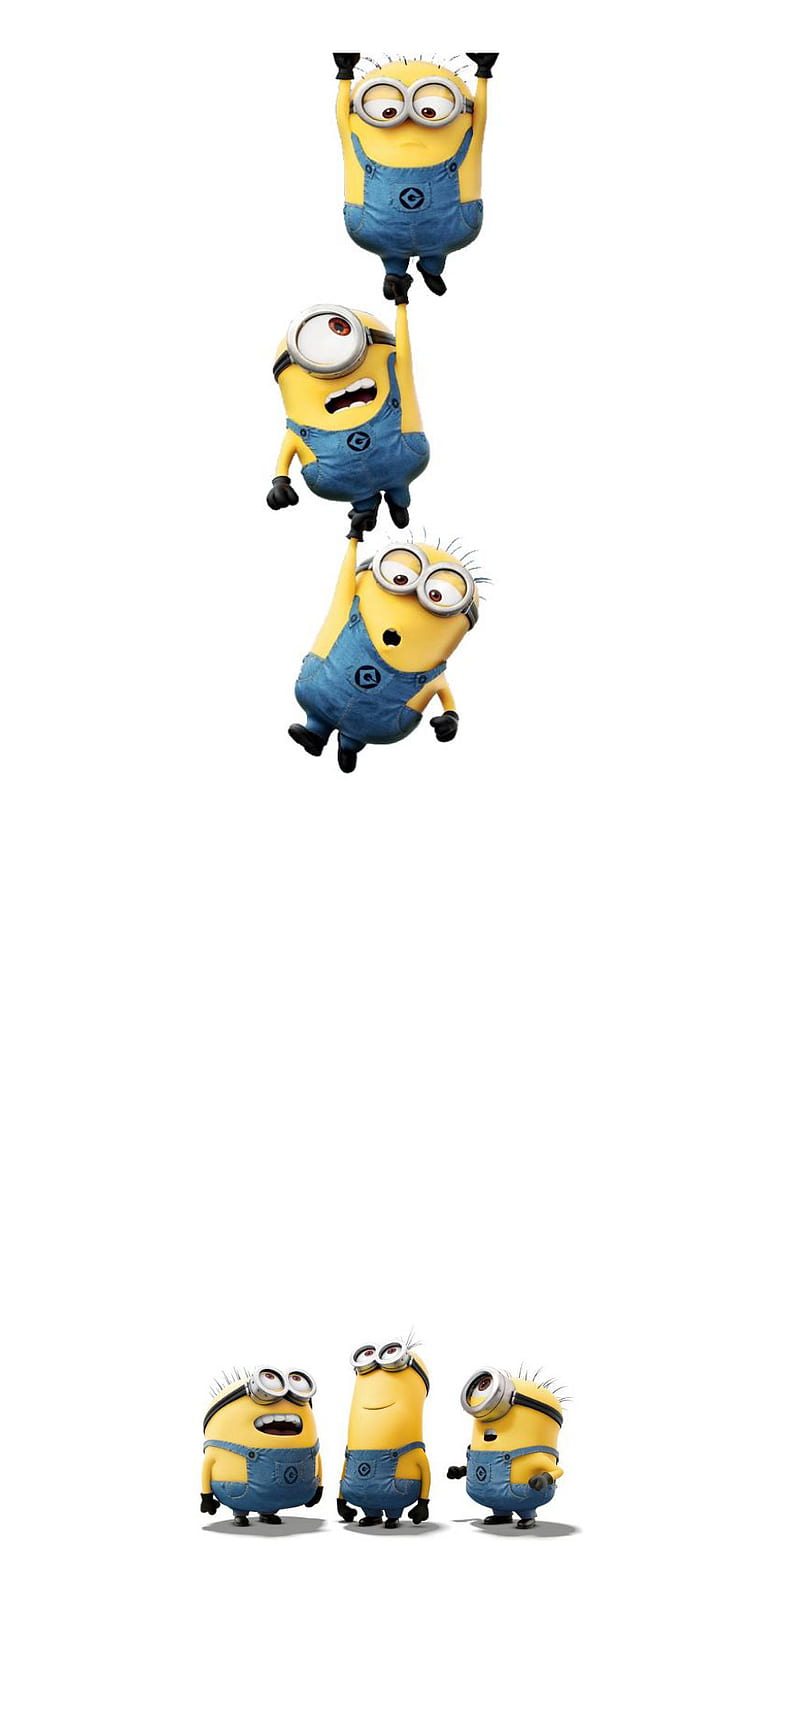 1080x1920 Minions Wallpapers for Android Mobile Smartphone [Full HD]